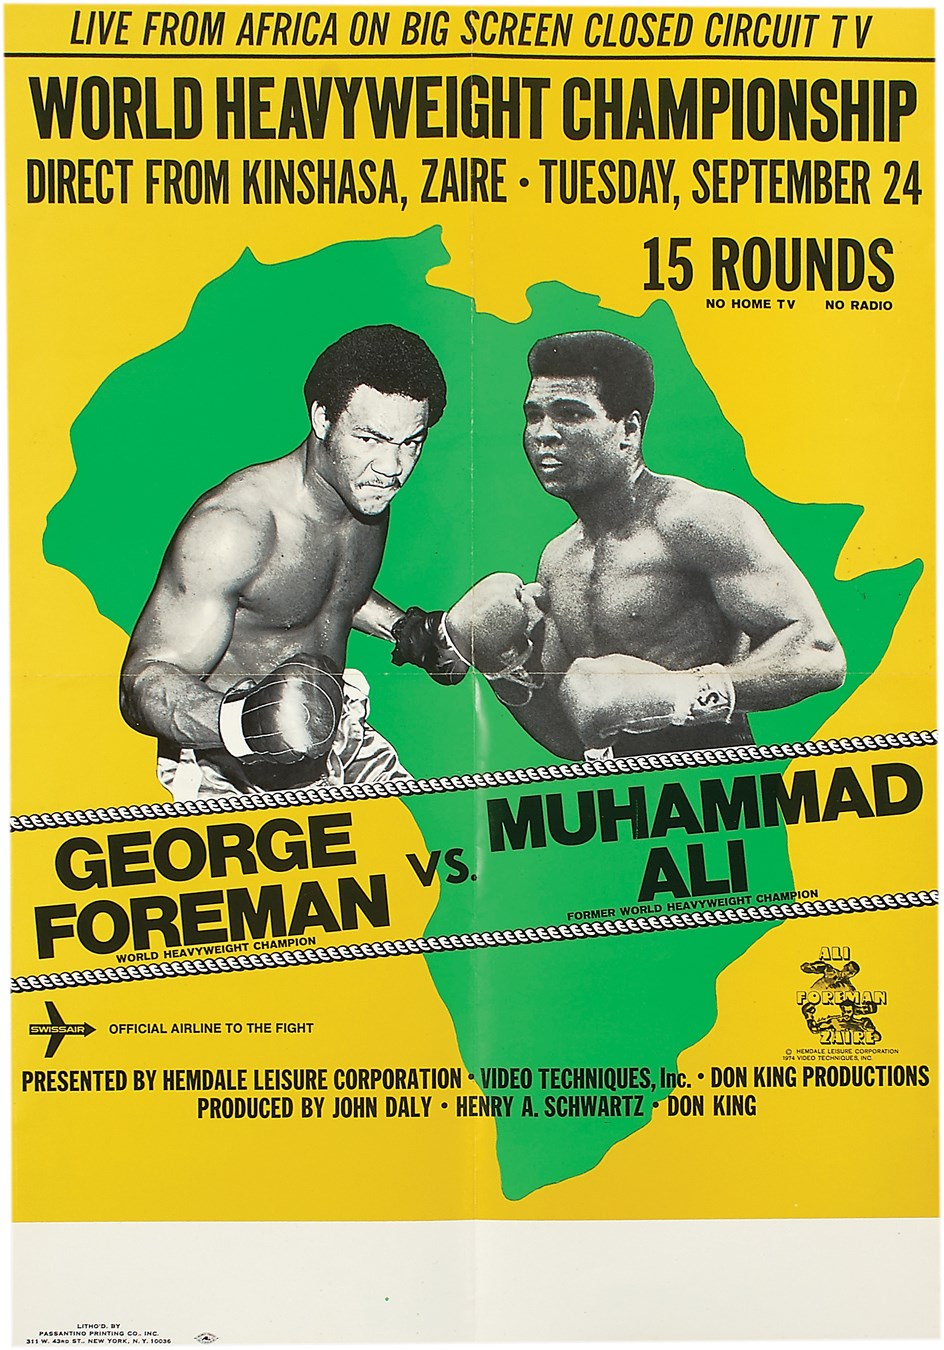 Muhammad Ali & Boxing - 1974 Muhammad Ali vs. George Foreman "Rumble In The Jungle" Zaire Boxing Poster